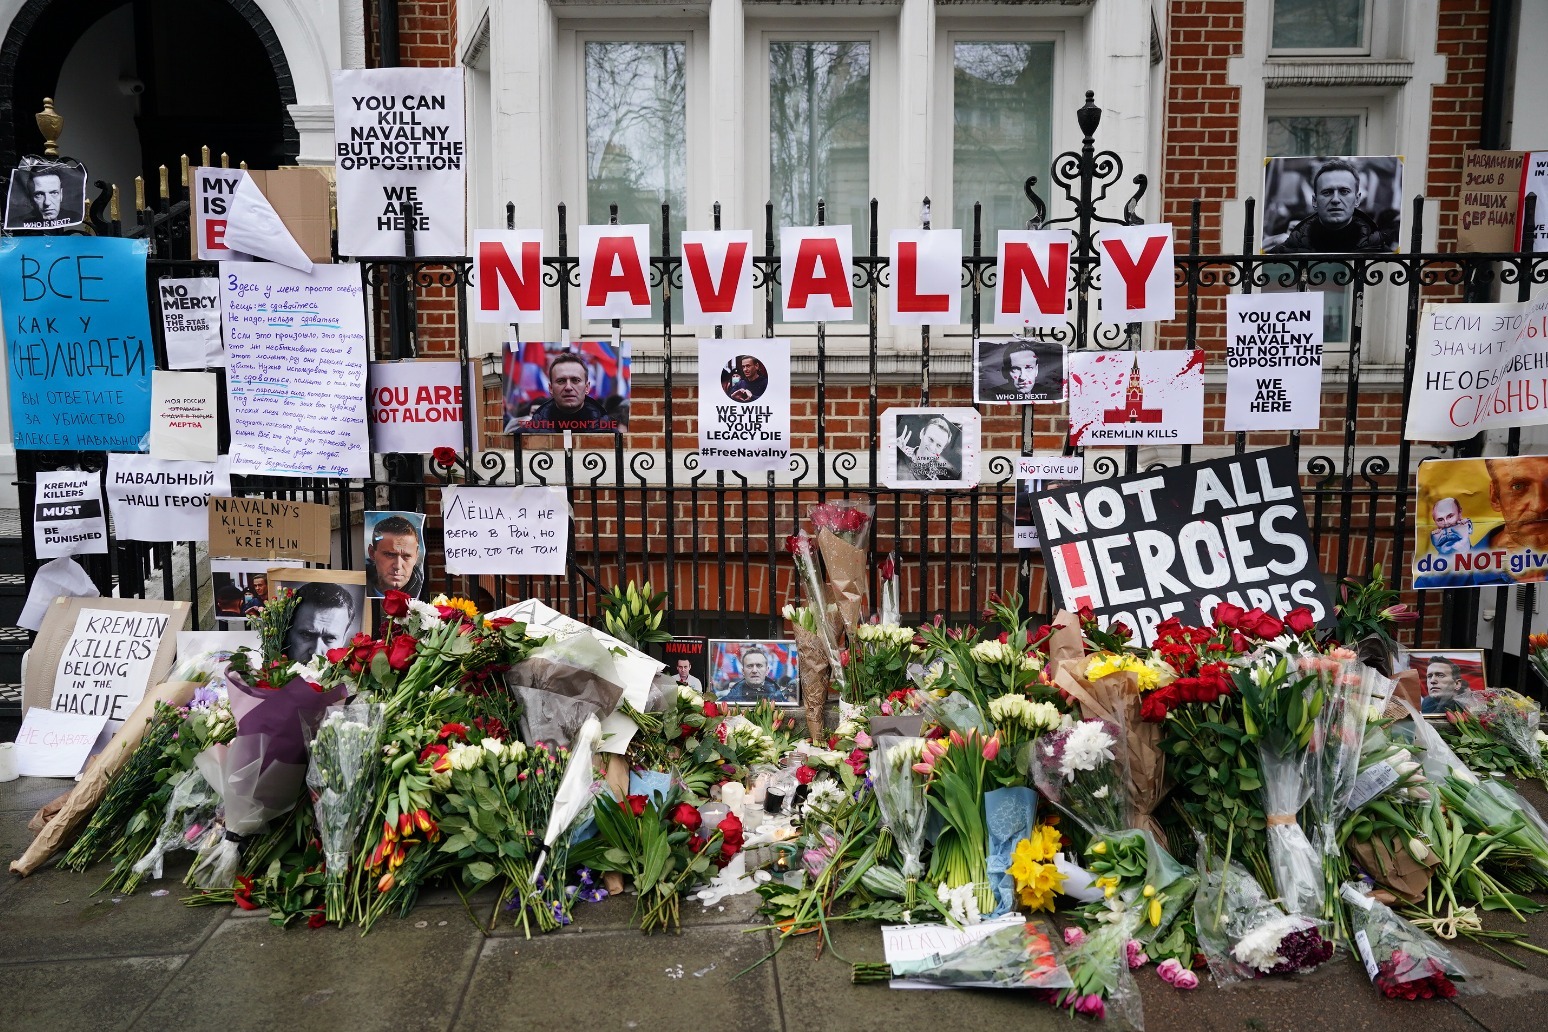 UK weighs up response in wake of Navalny death